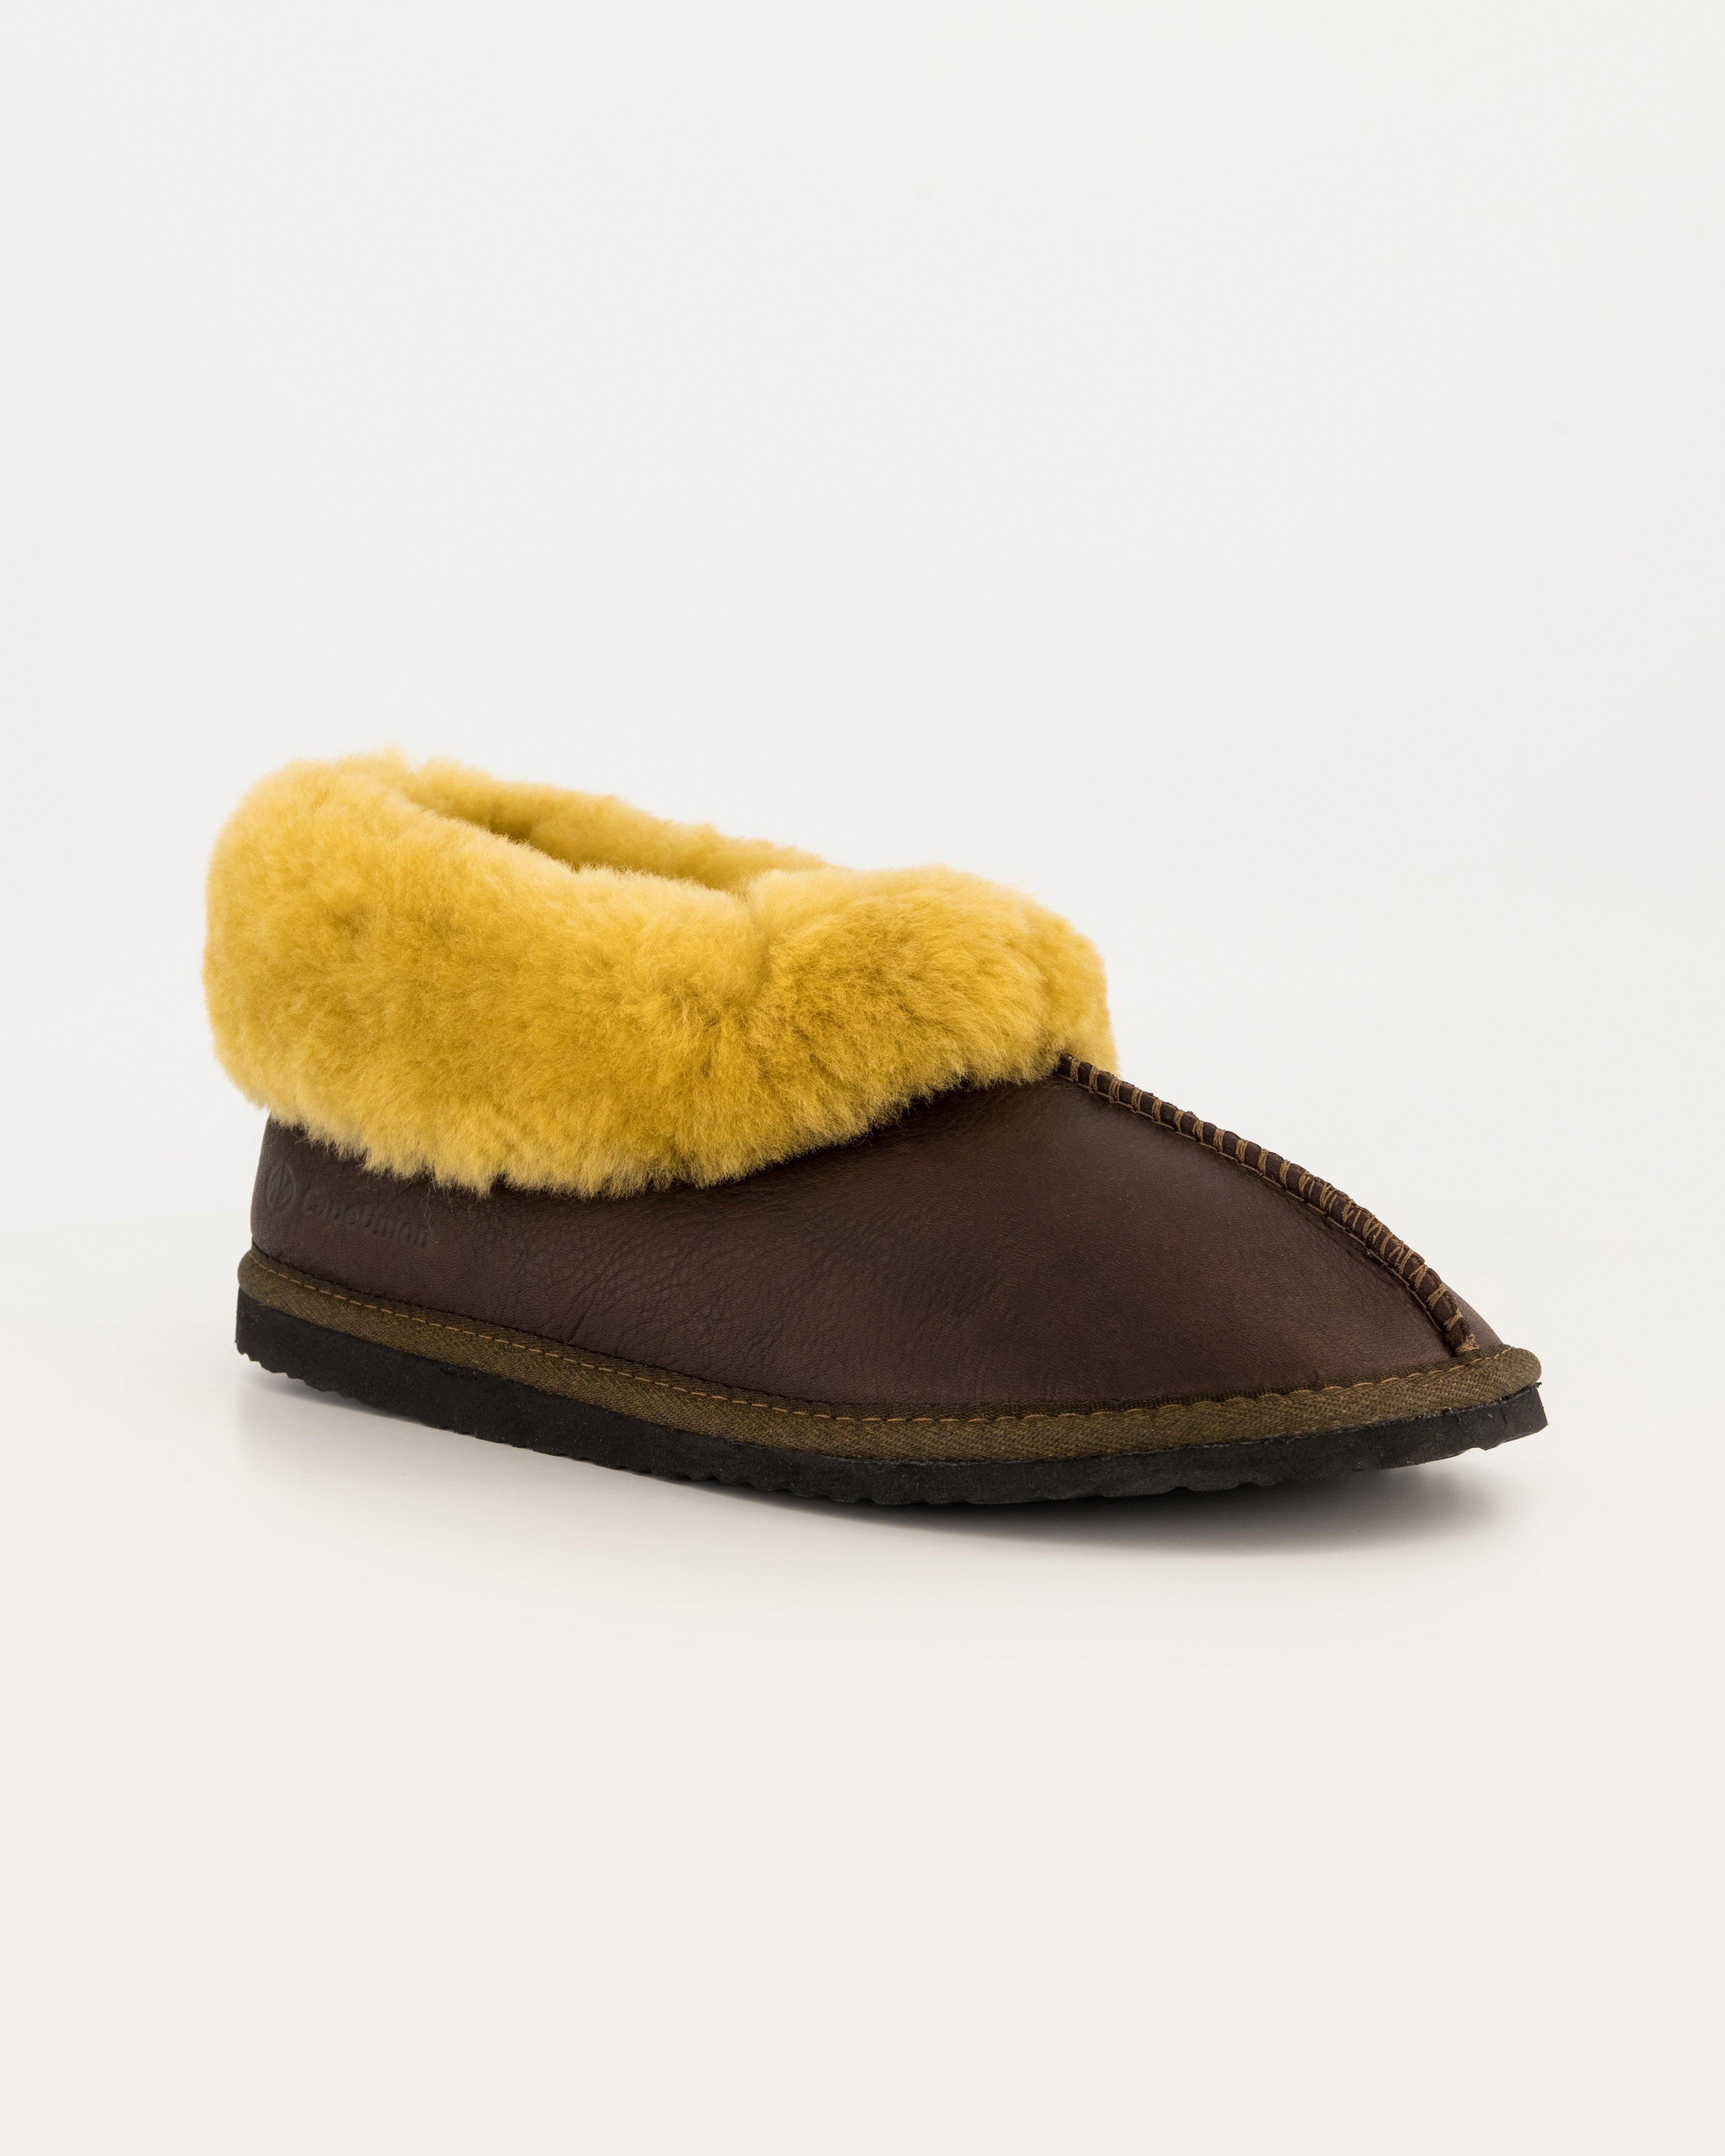 Cape Union Men's Sheepswool Classic Slippers -  Chocolate